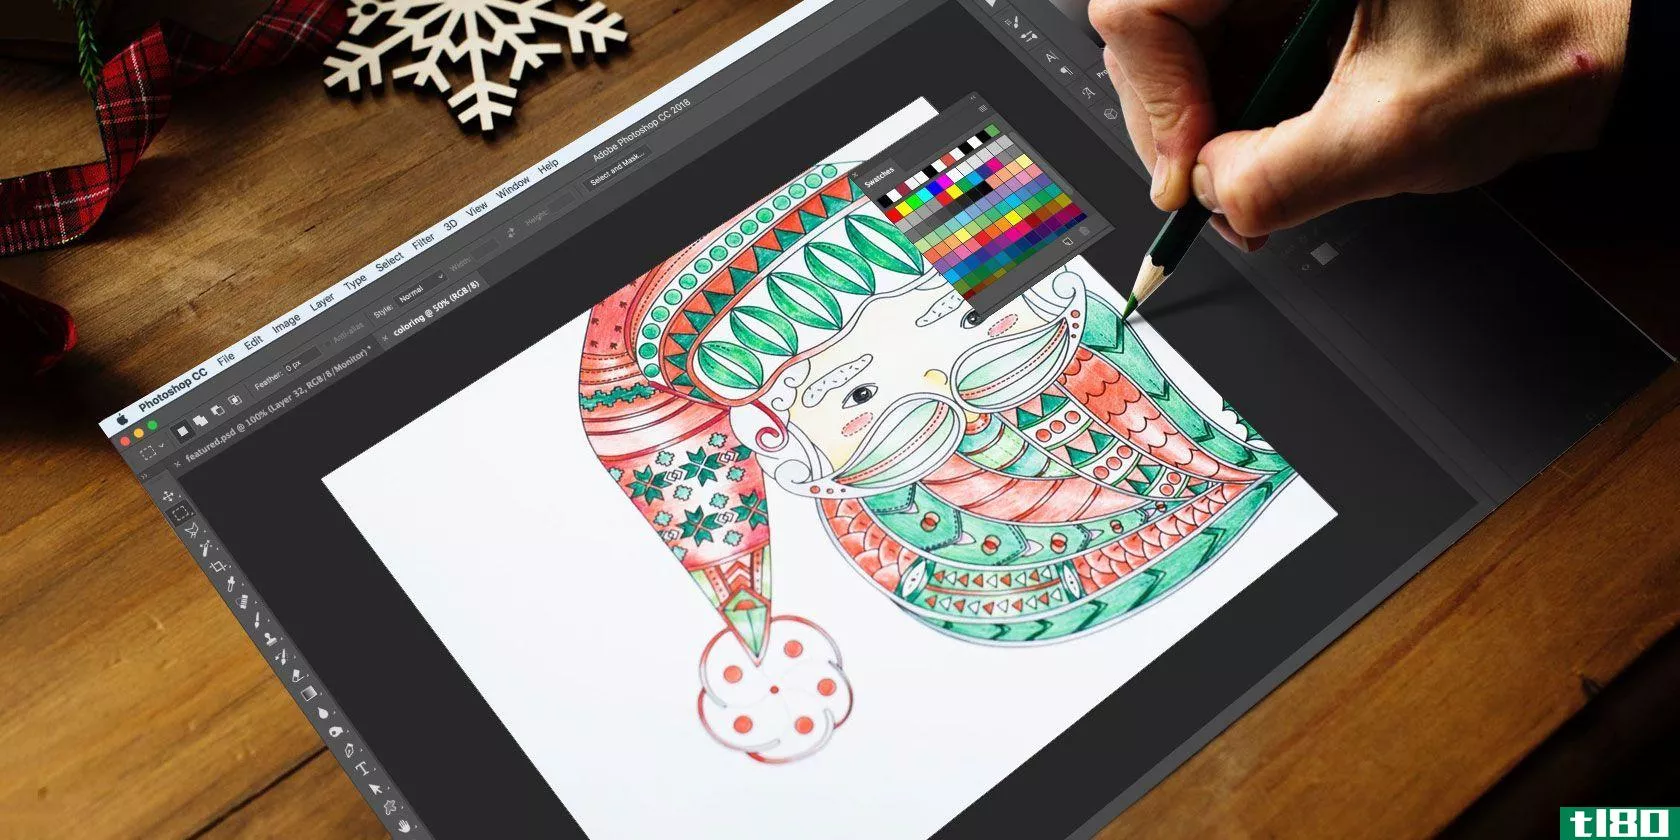 coloring-in-photoshop